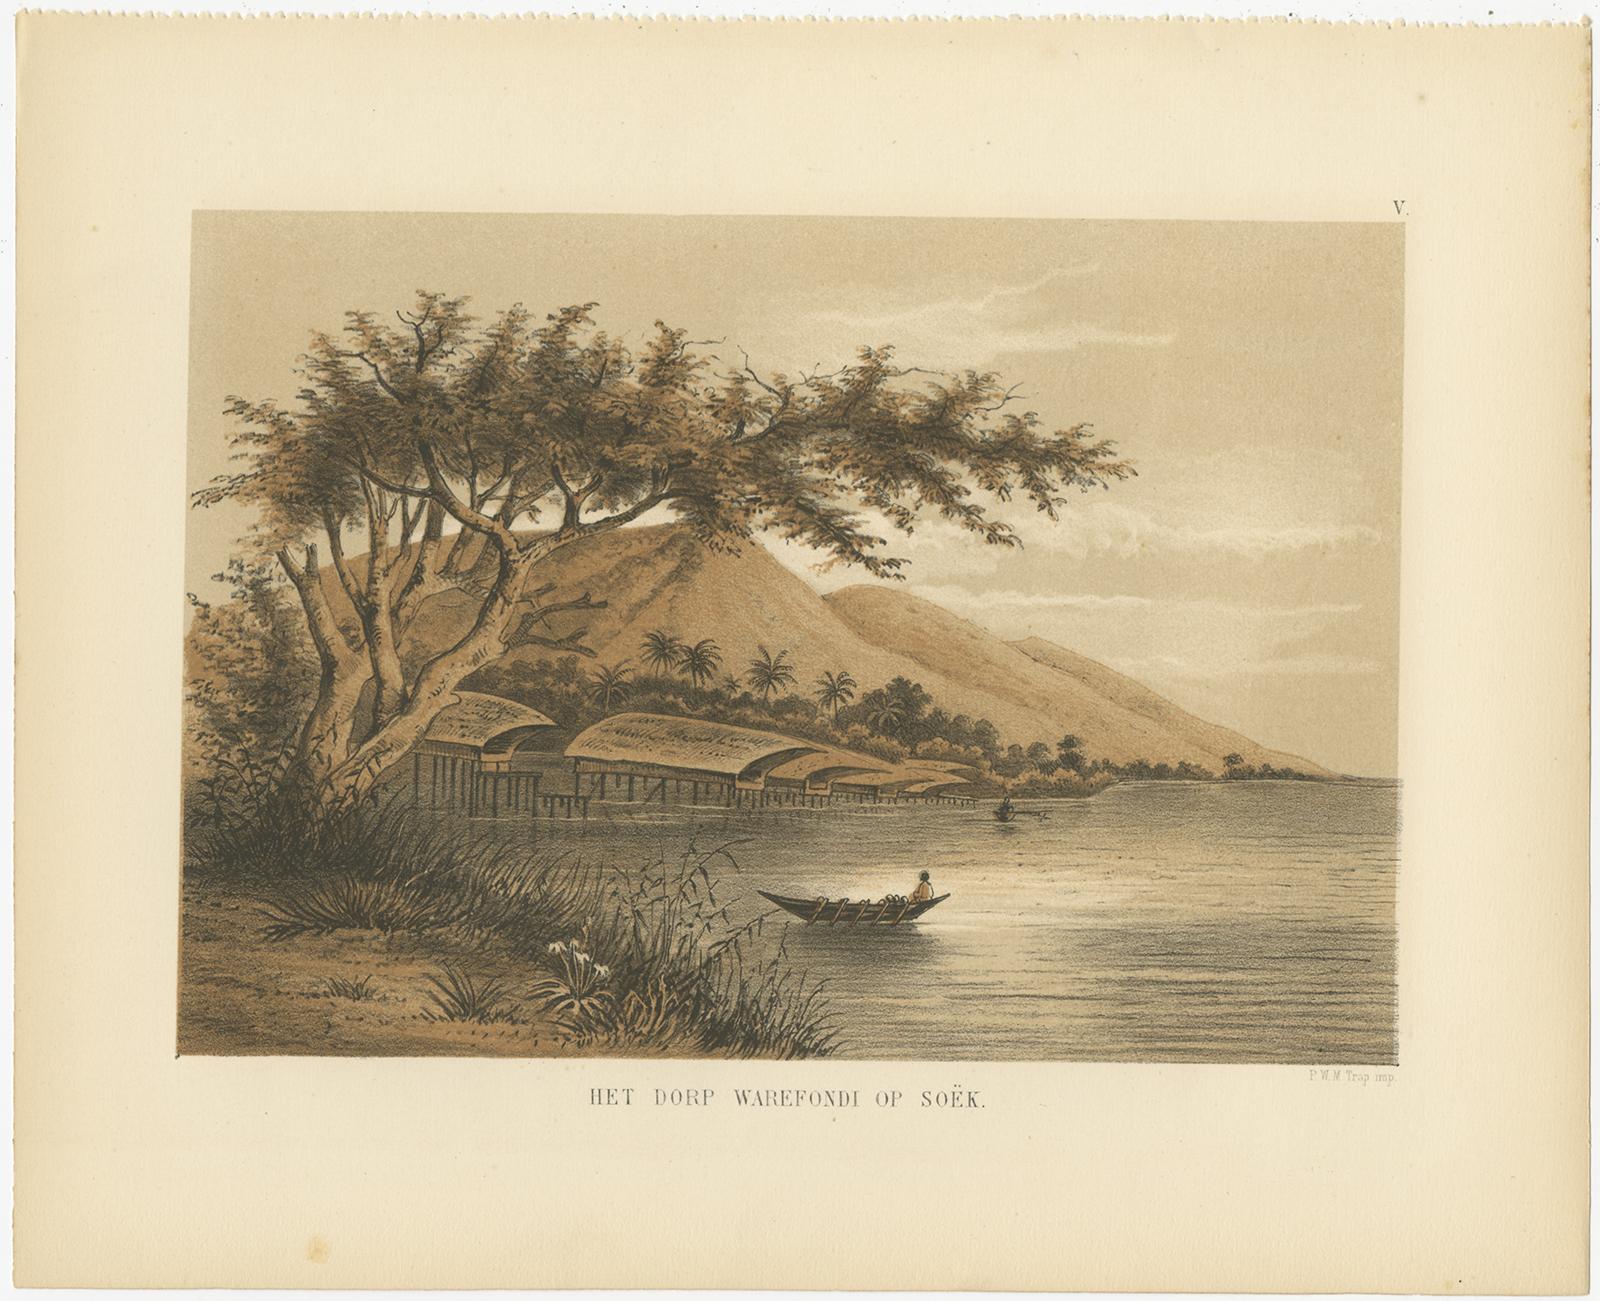 Set of 21 Antique Prints Illustrating the Travels to Cenderawasih Bay, 1875 For Sale 1